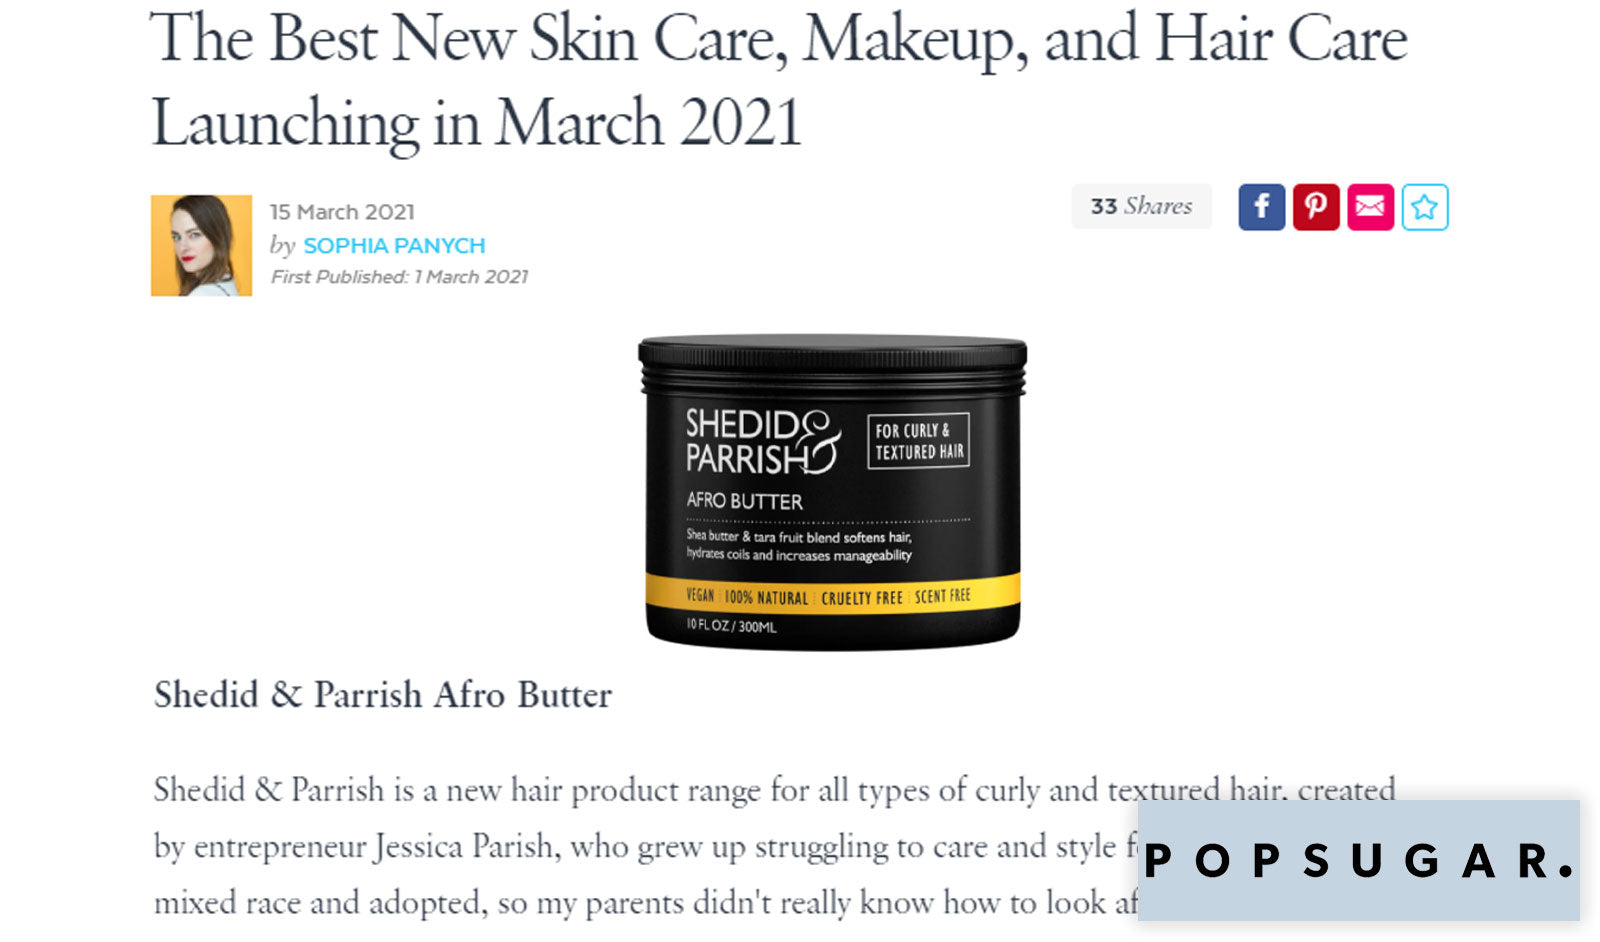 The Best New Skin Care, Makeup, and Hair Care Launching in March 2021